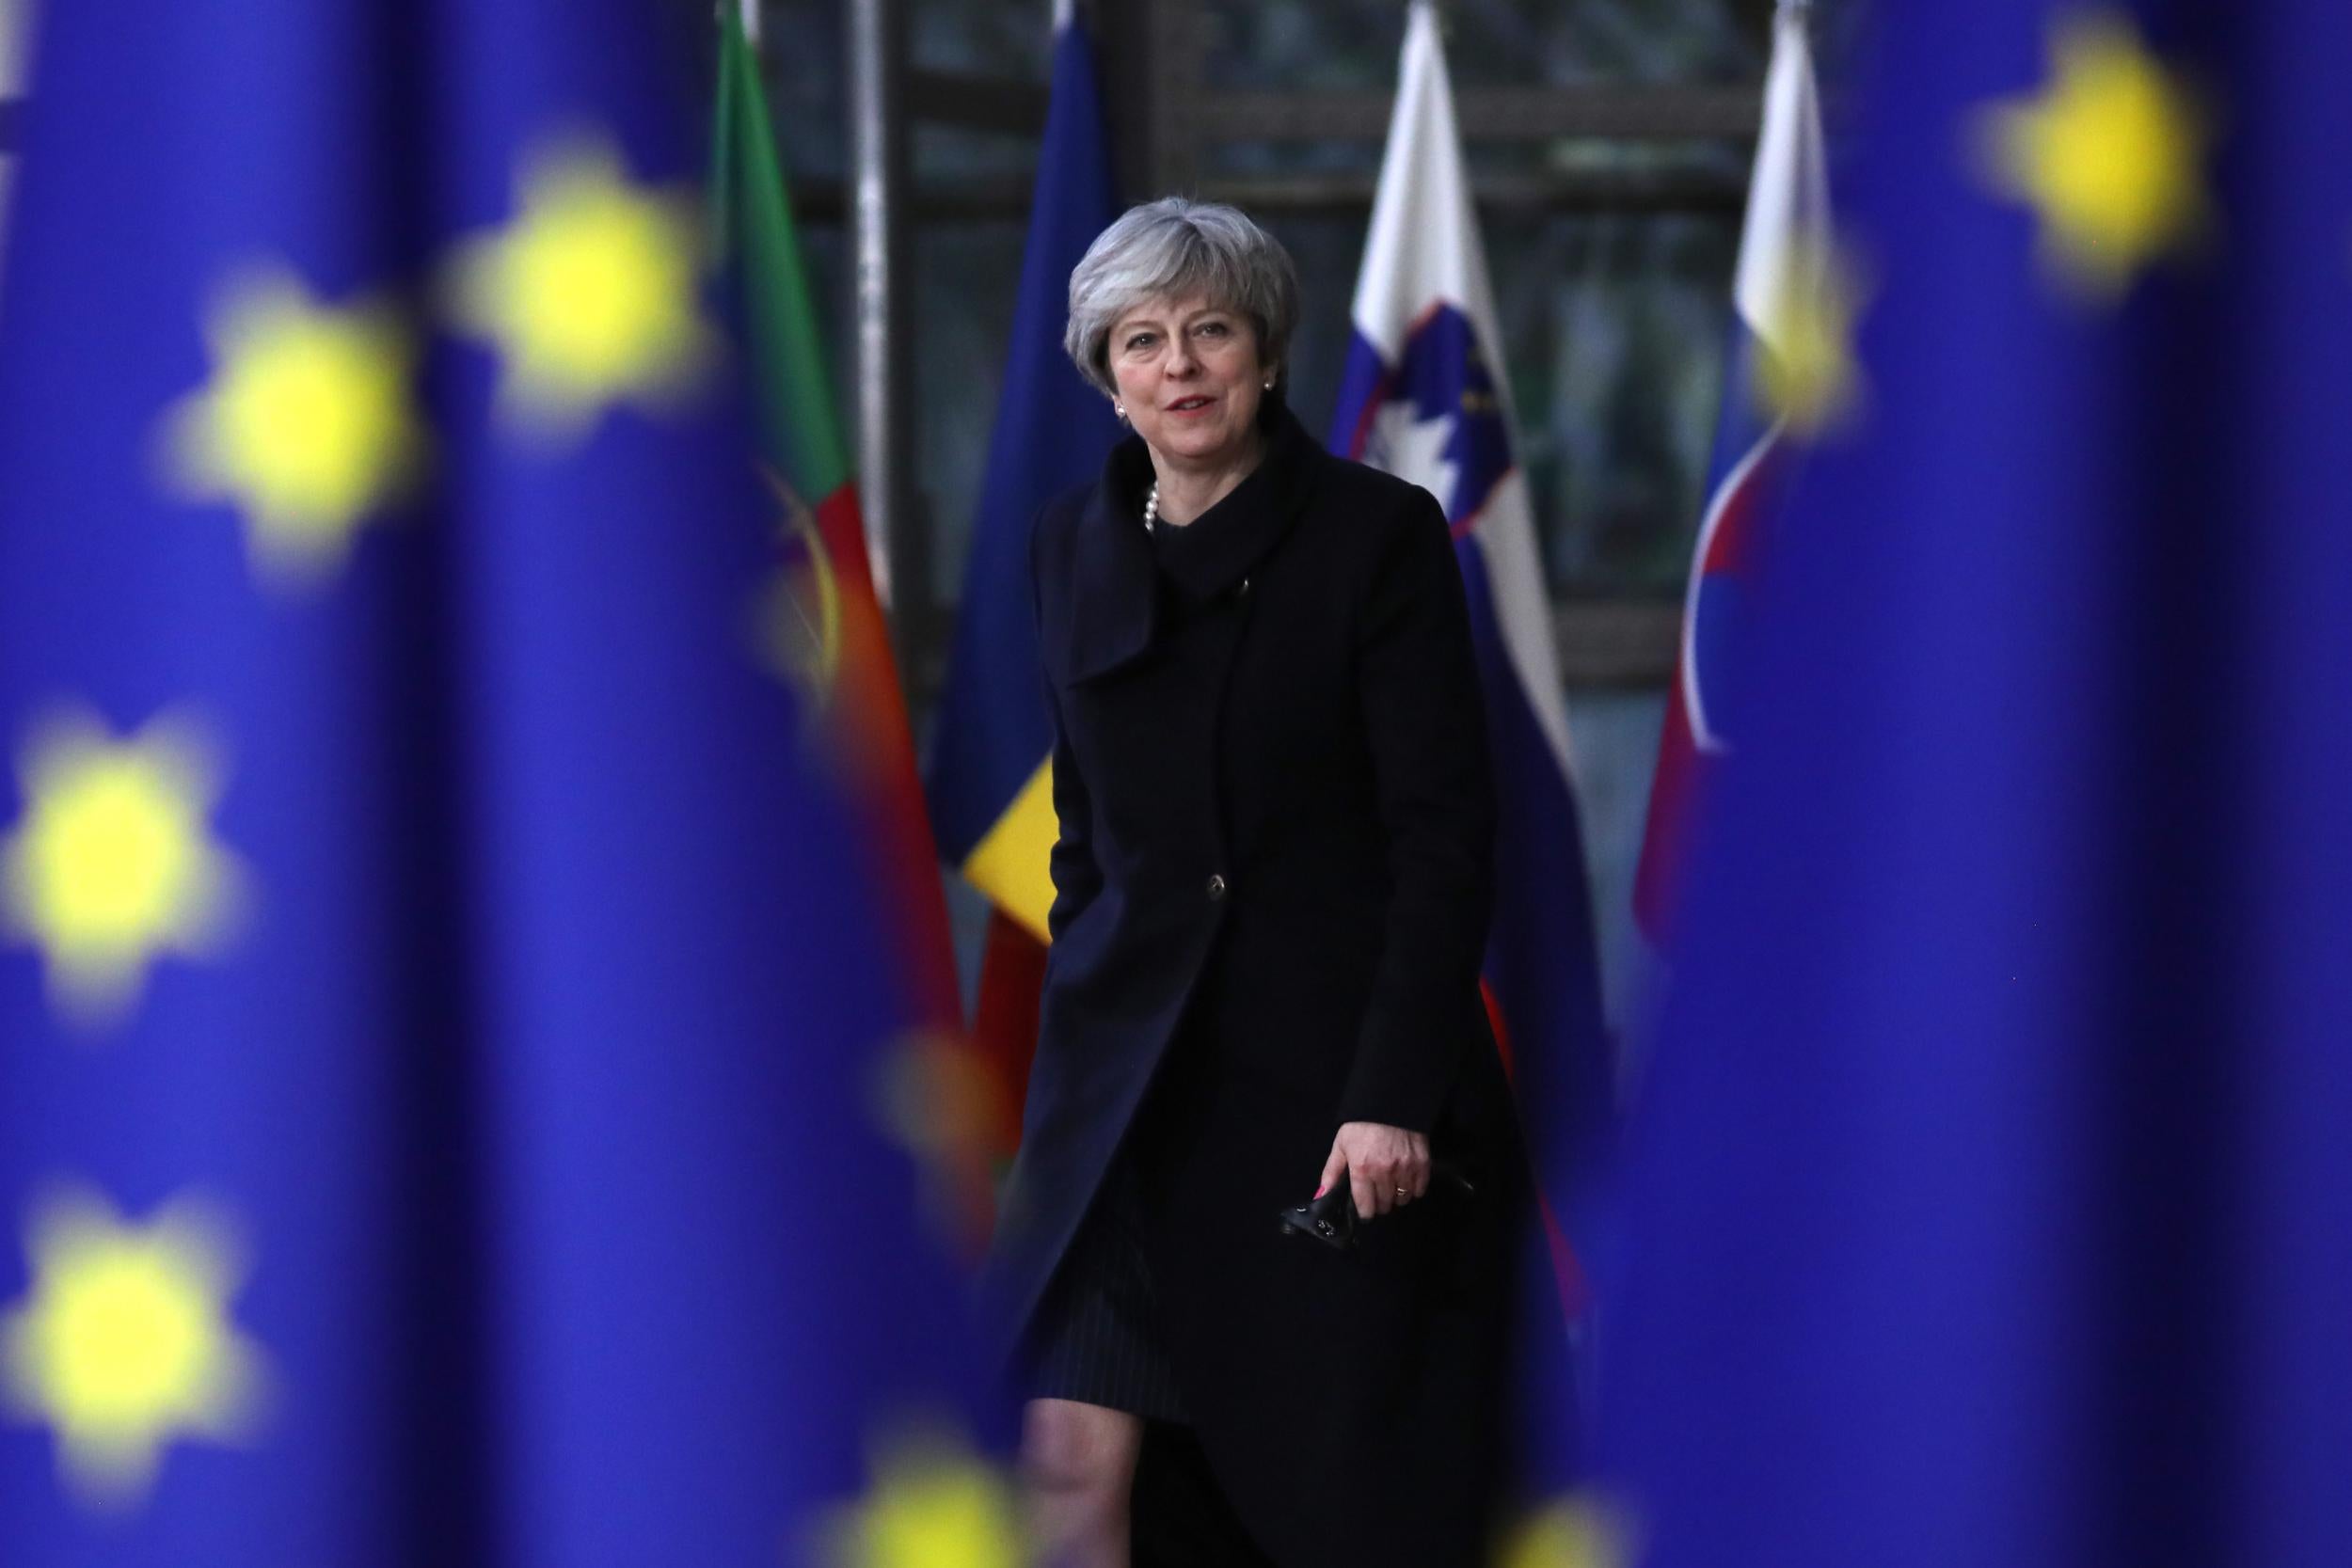 The latest legal challenge comes after Ms May faced an embarrassing defeat in the Commons at the hands of Tory rebels, and was forced to guarantee Parliament a ‘meaningful’ final vote on any deal